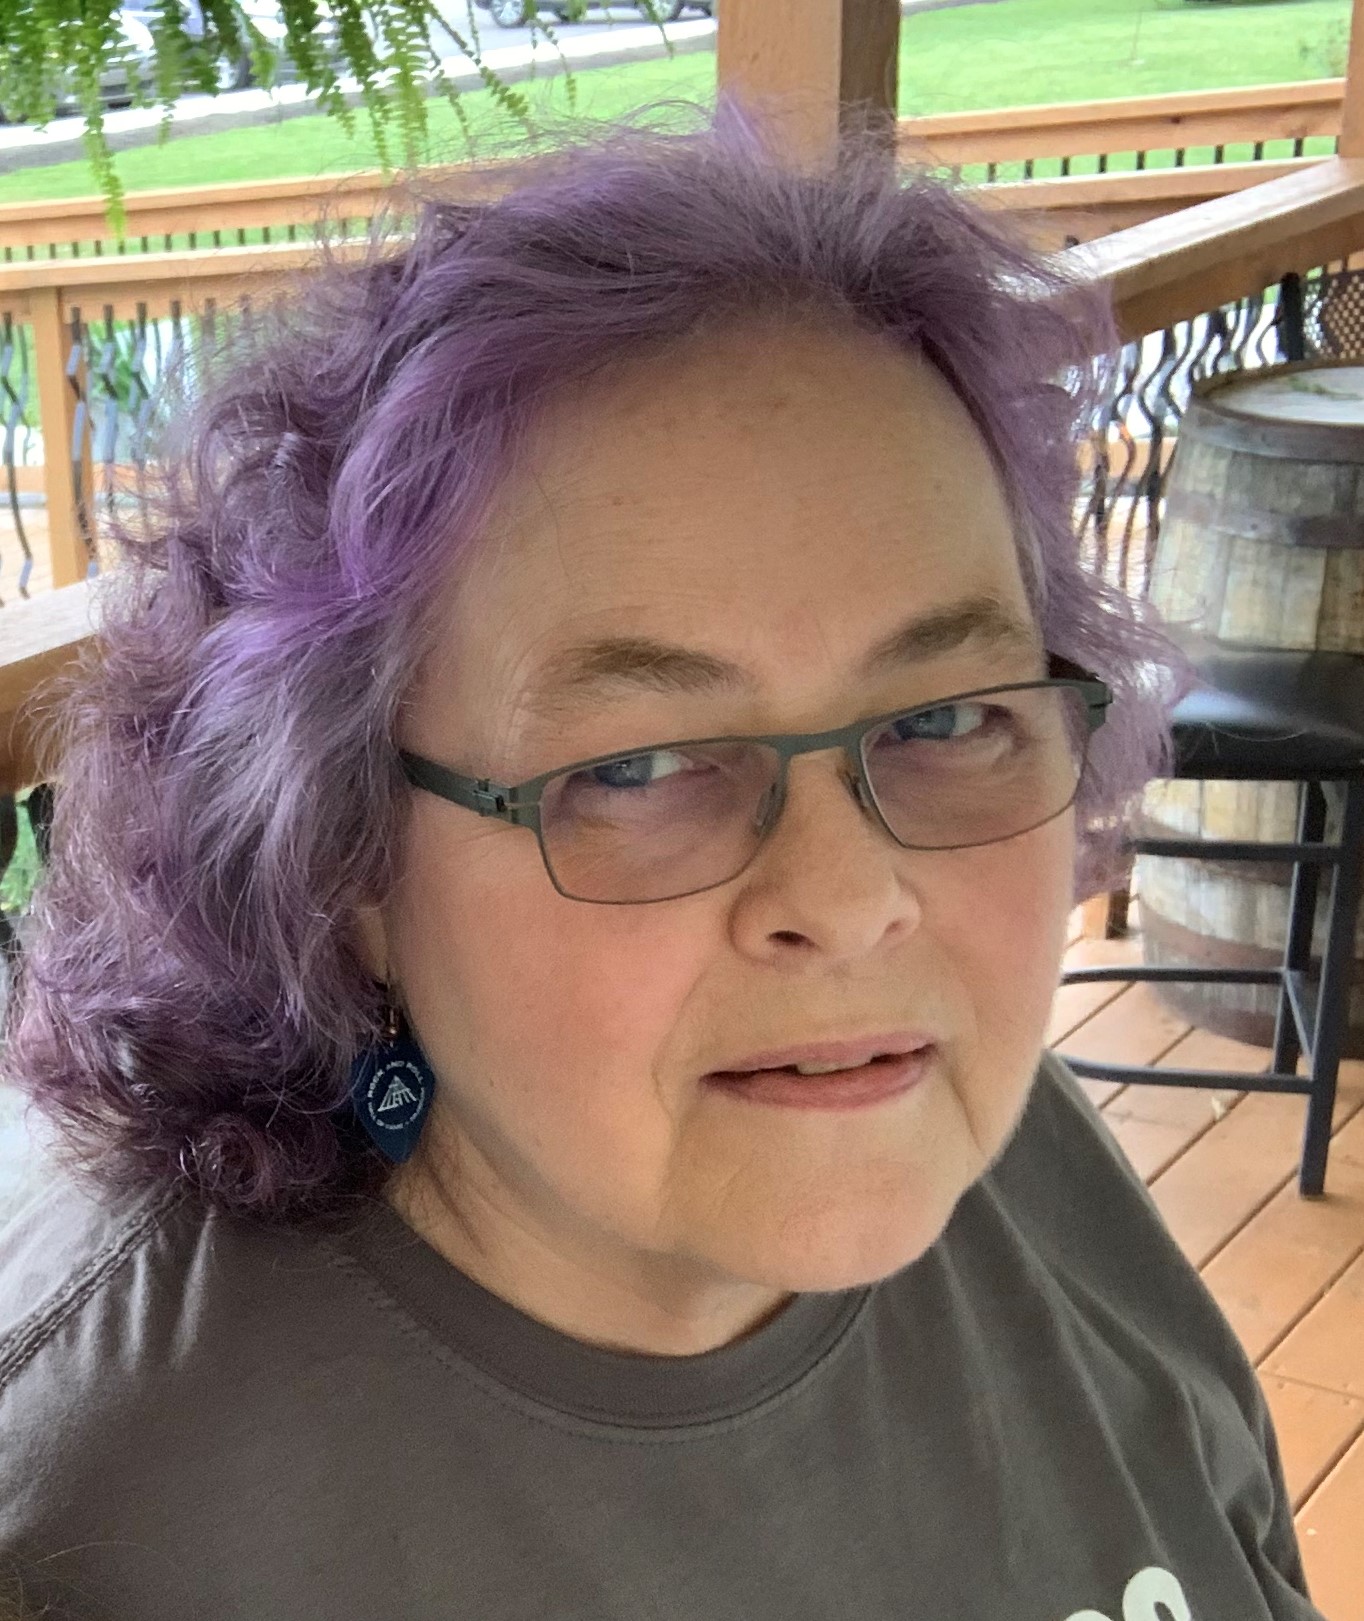 white woman with glasses and shoulder length hair that's dyed purple